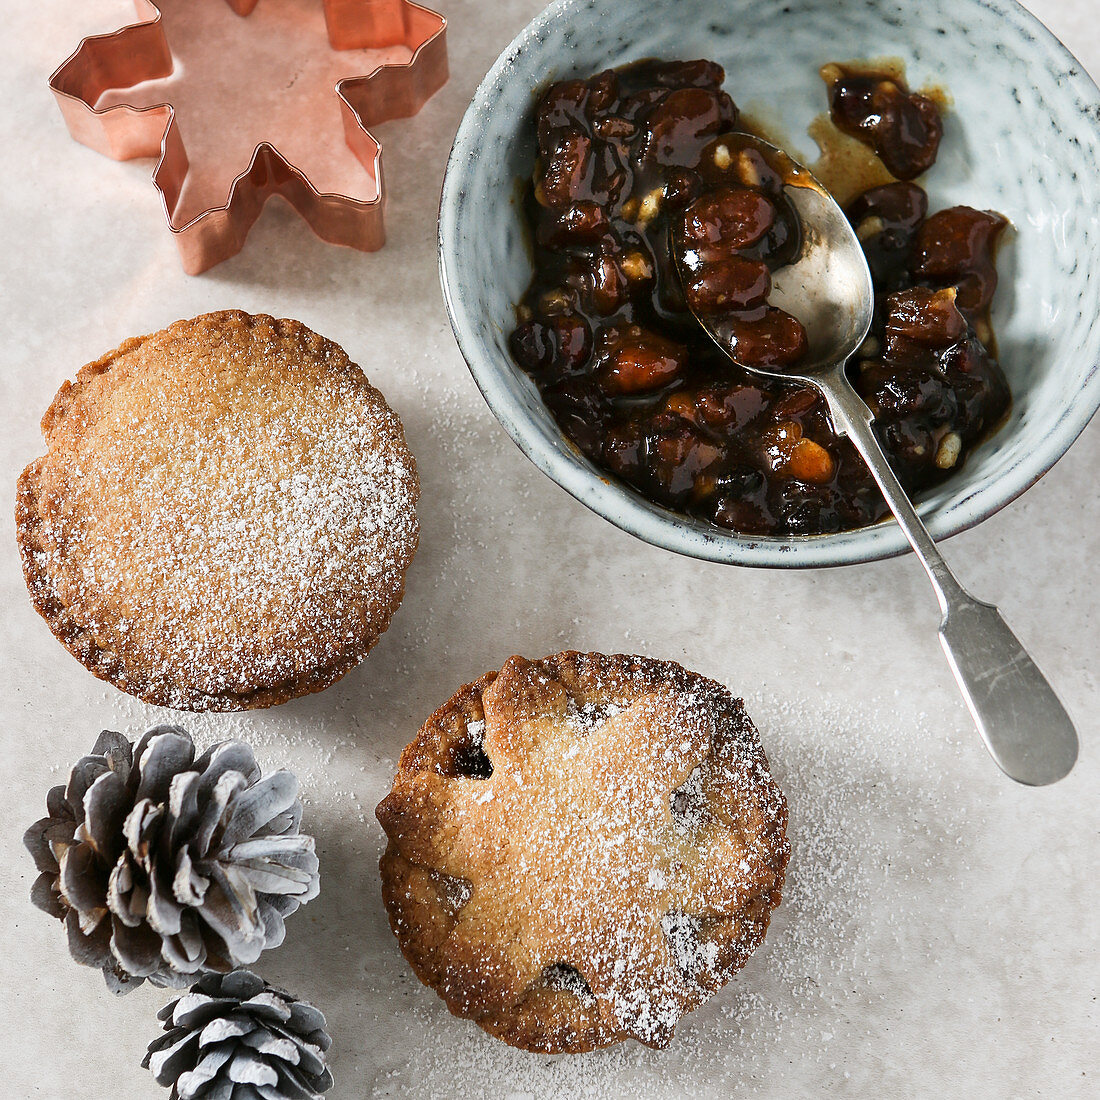 Mince pies, mince pie filling, a cookie cutter, and pine cones